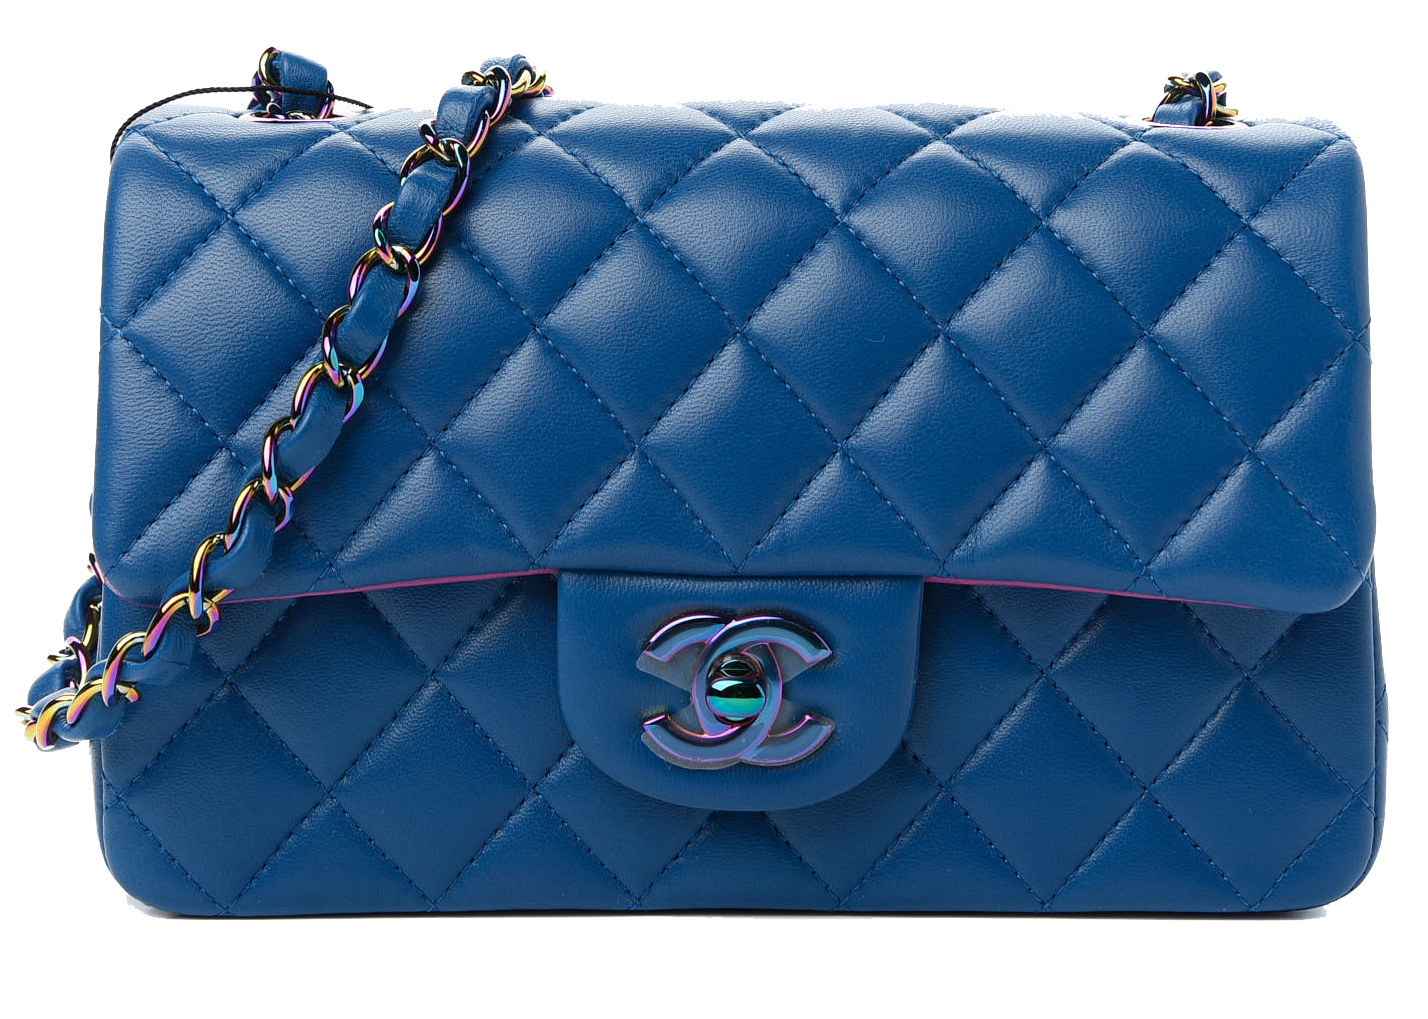 Chanels new 1112 bag campaign The Chanel Iconic launches SS21